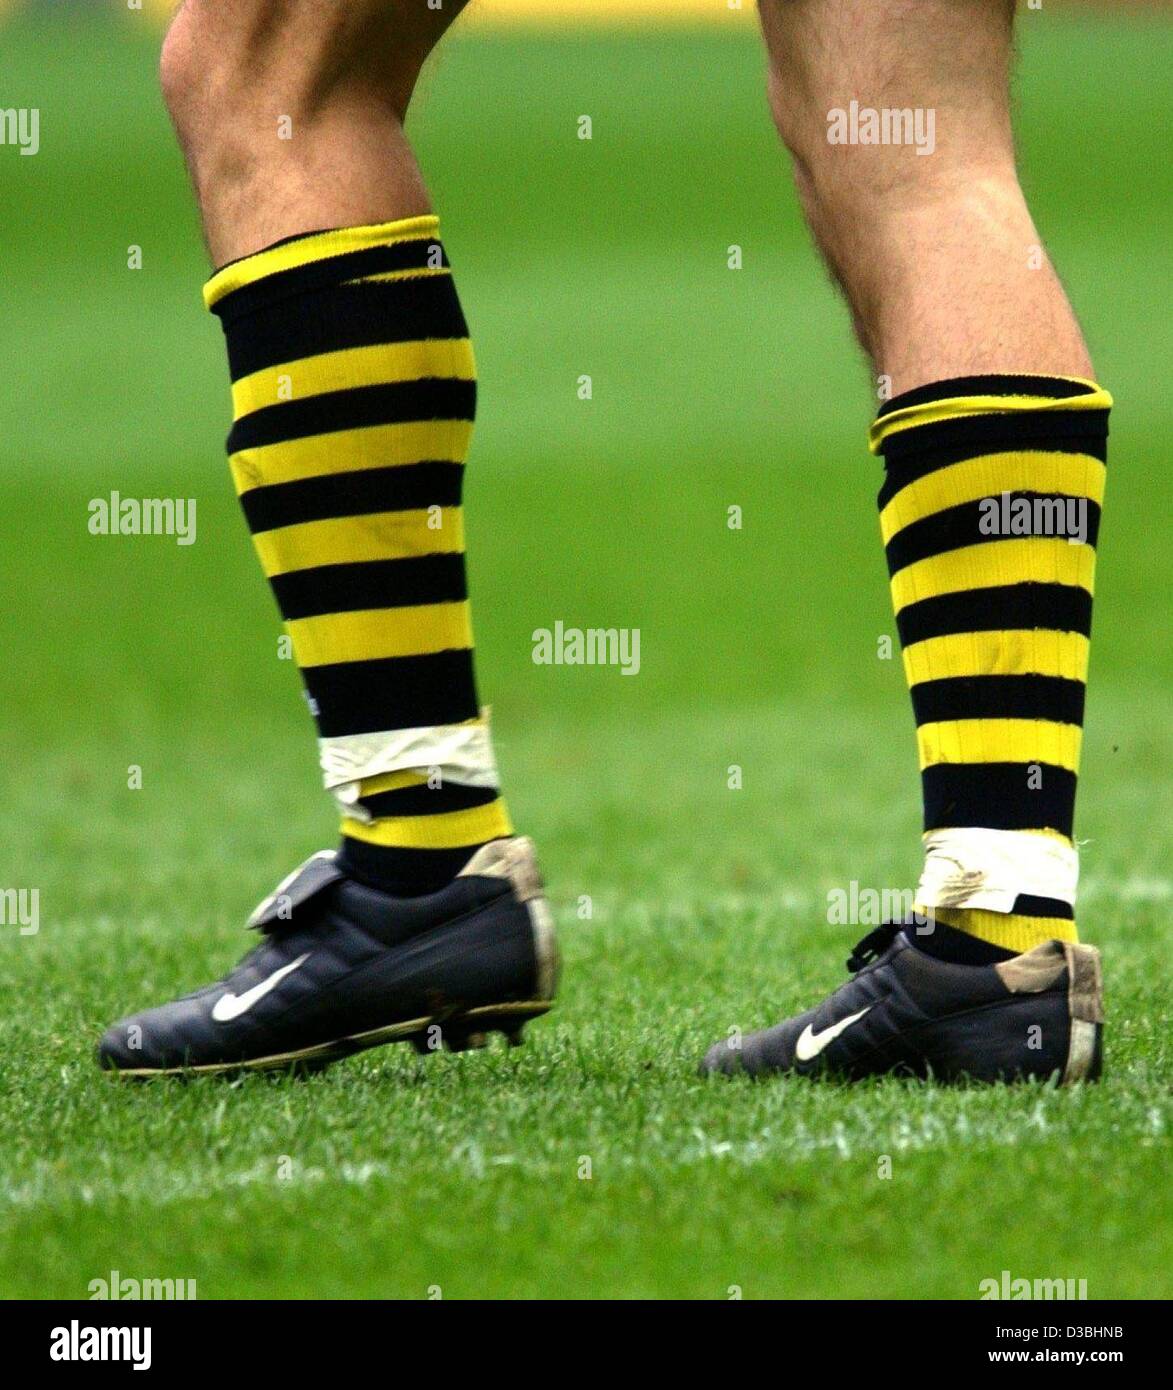 (dpa) - The legs of Jan Koller, forward of the German soccer club Borussia Dortmund, are seen during a game in Dortmund, Gemany, 19 April 2003. He wears trainers of size 52. Stock Photo